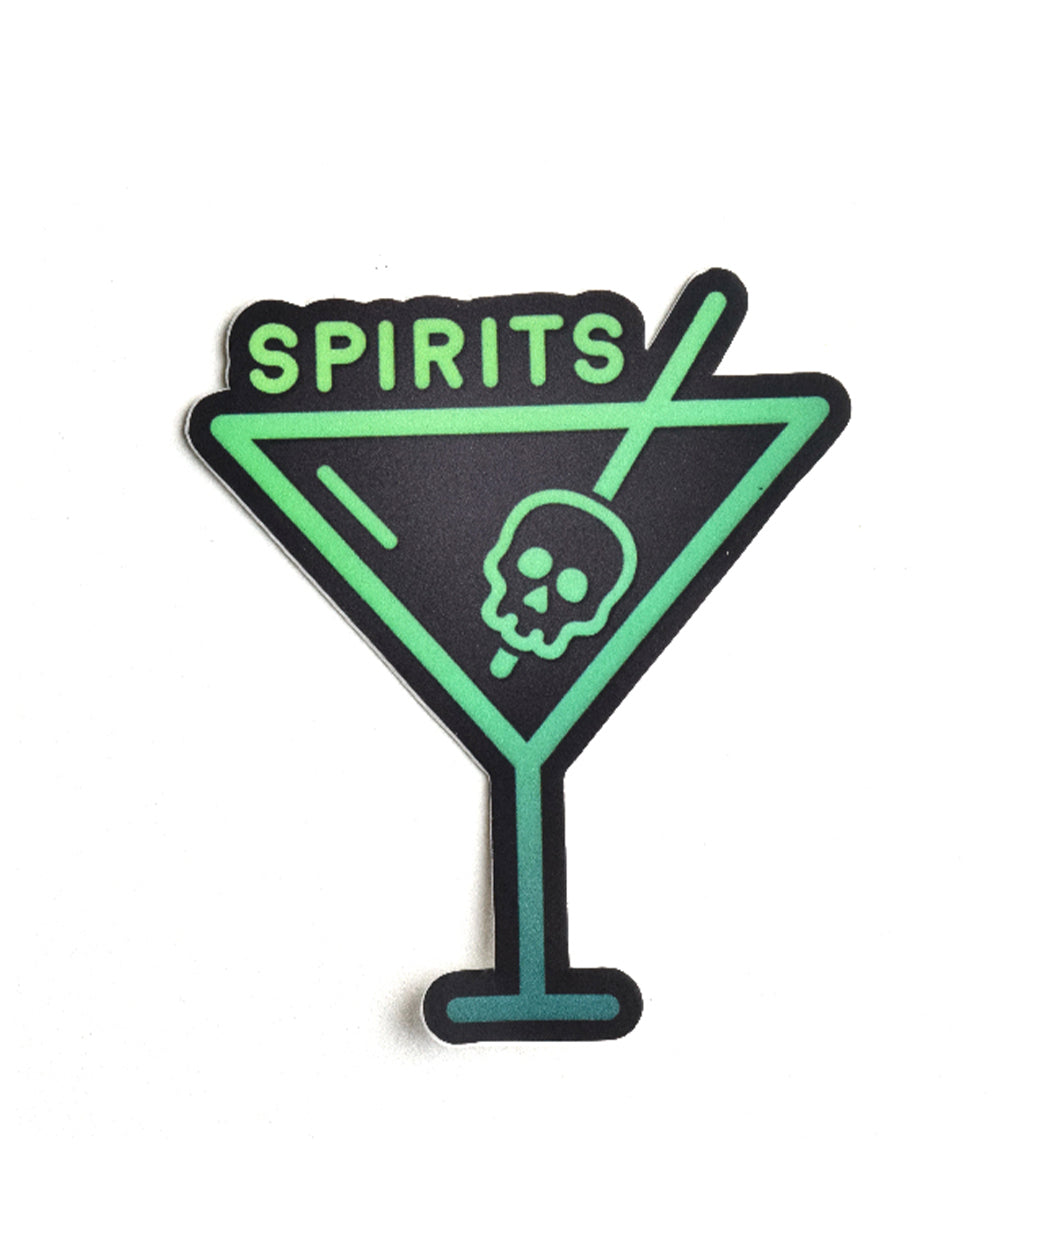 A green martini glass with a black outline and black fill. A green straw pierces a green outline of a skull. “Spirits” is on the top of the glass in green sans serif font - from Spirits